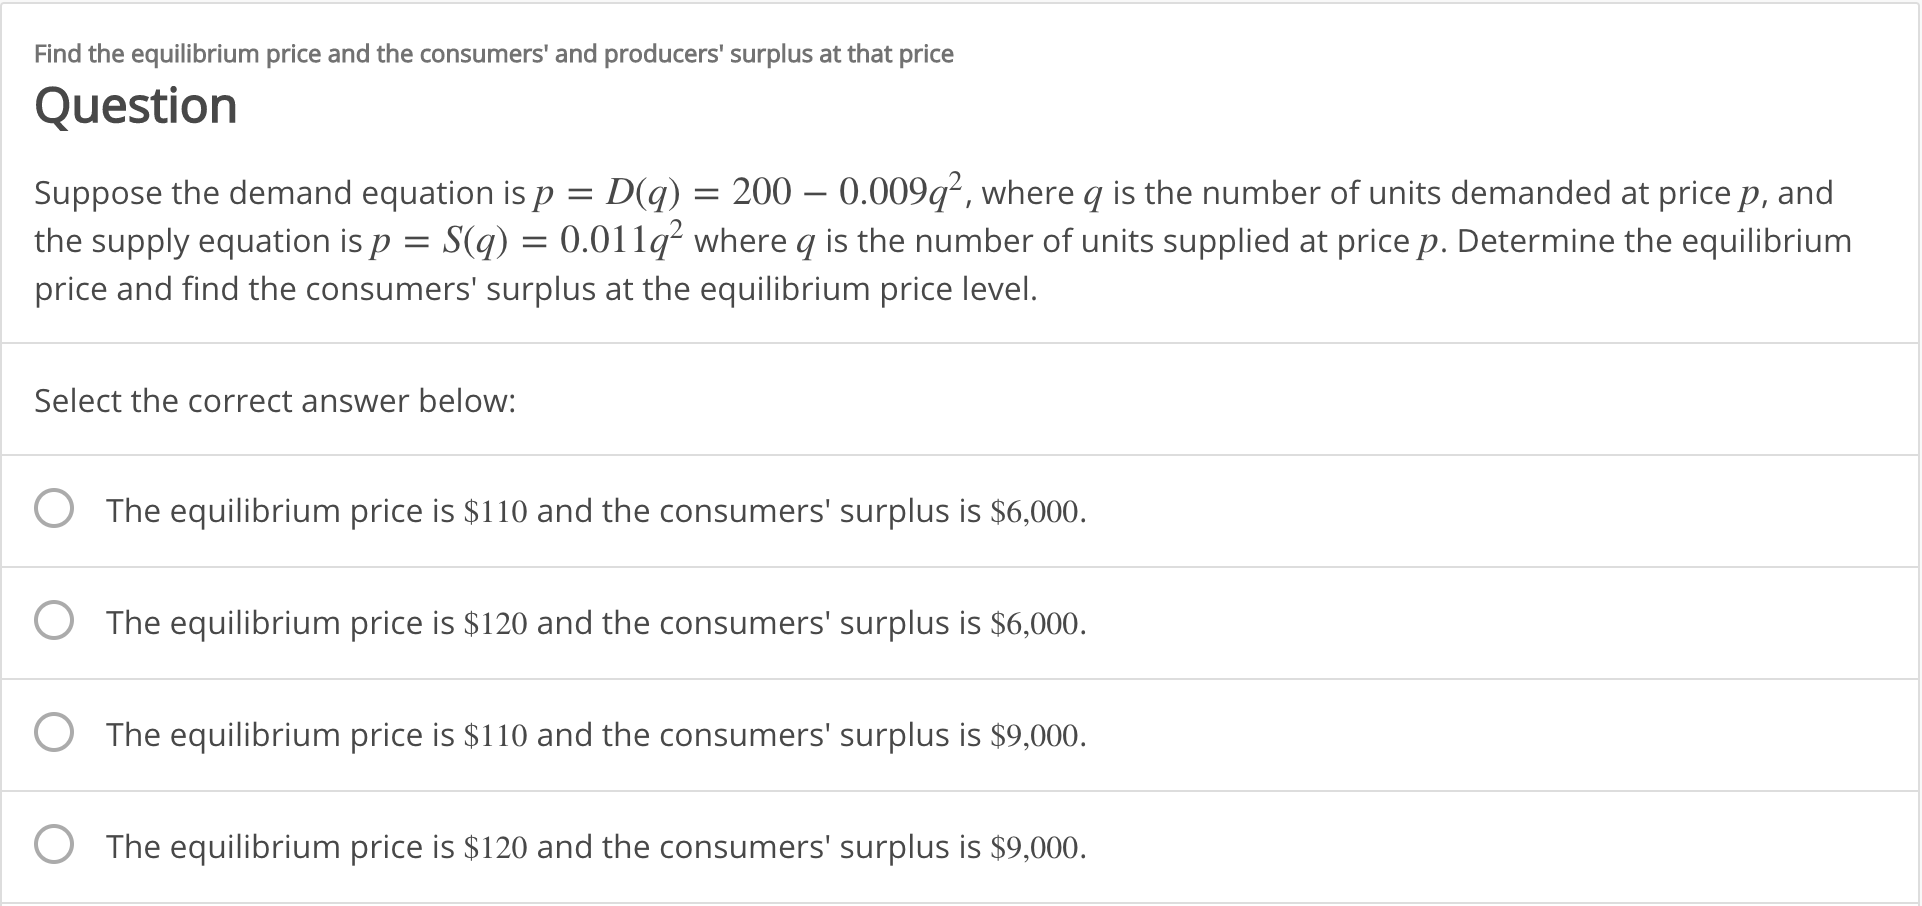 Find the equilibrium price and the consumers' and producers' surplus at that price
Question
D(q) 200 0.009q2, where q is the number of units demanded at price p, and
0.011q2 where q is the number of units supplied at price p. Determine the equilibrium
Suppose the demand equation is p
the supply equation is p S(q)
price and find the consumers' surplus at the equilibrium price level.
Select the correct answer below:
The equilibrium price is $110 and the consumers' surplus is $6,000.
The equilibrium price is $120 and the consumers' surplus is $6,000.
The equilibrium price is $110 and the consumers' surplus is $9,000
The equilibrium price is $120 and the consumers' surplus is $9,000
